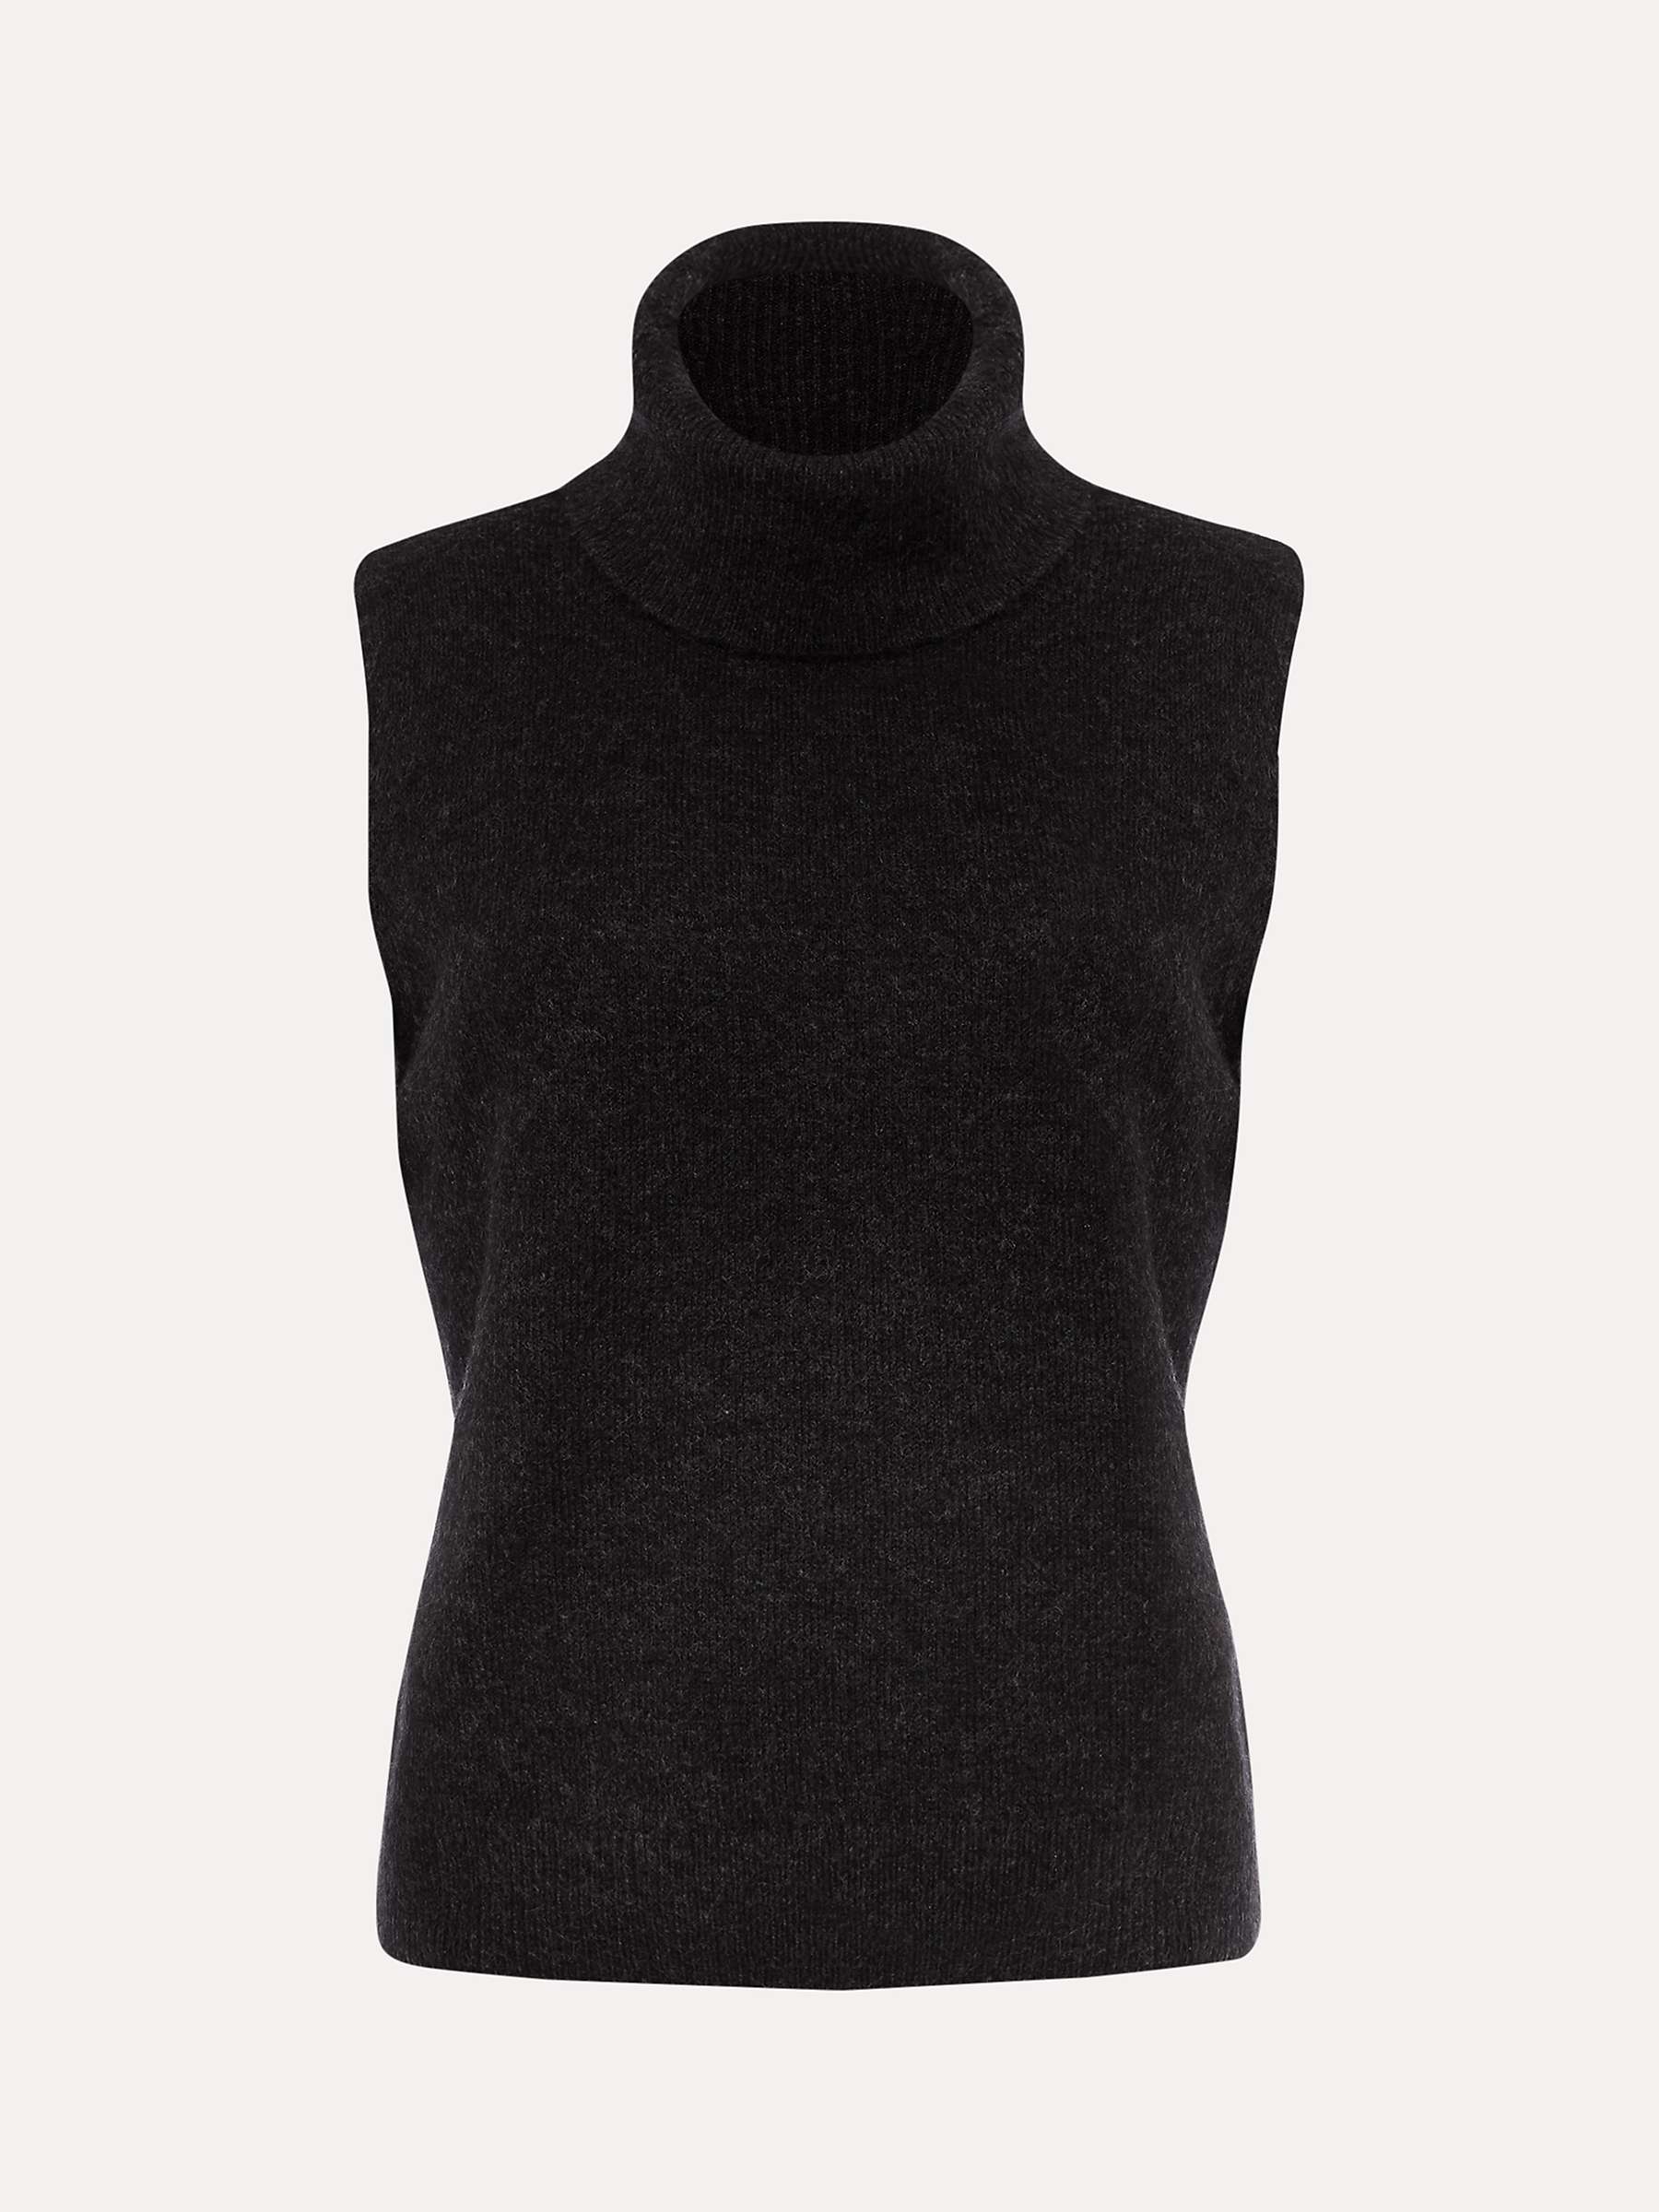 Phase Eight Cindy Sleeveless Top, Charcoal at John Lewis & Partners